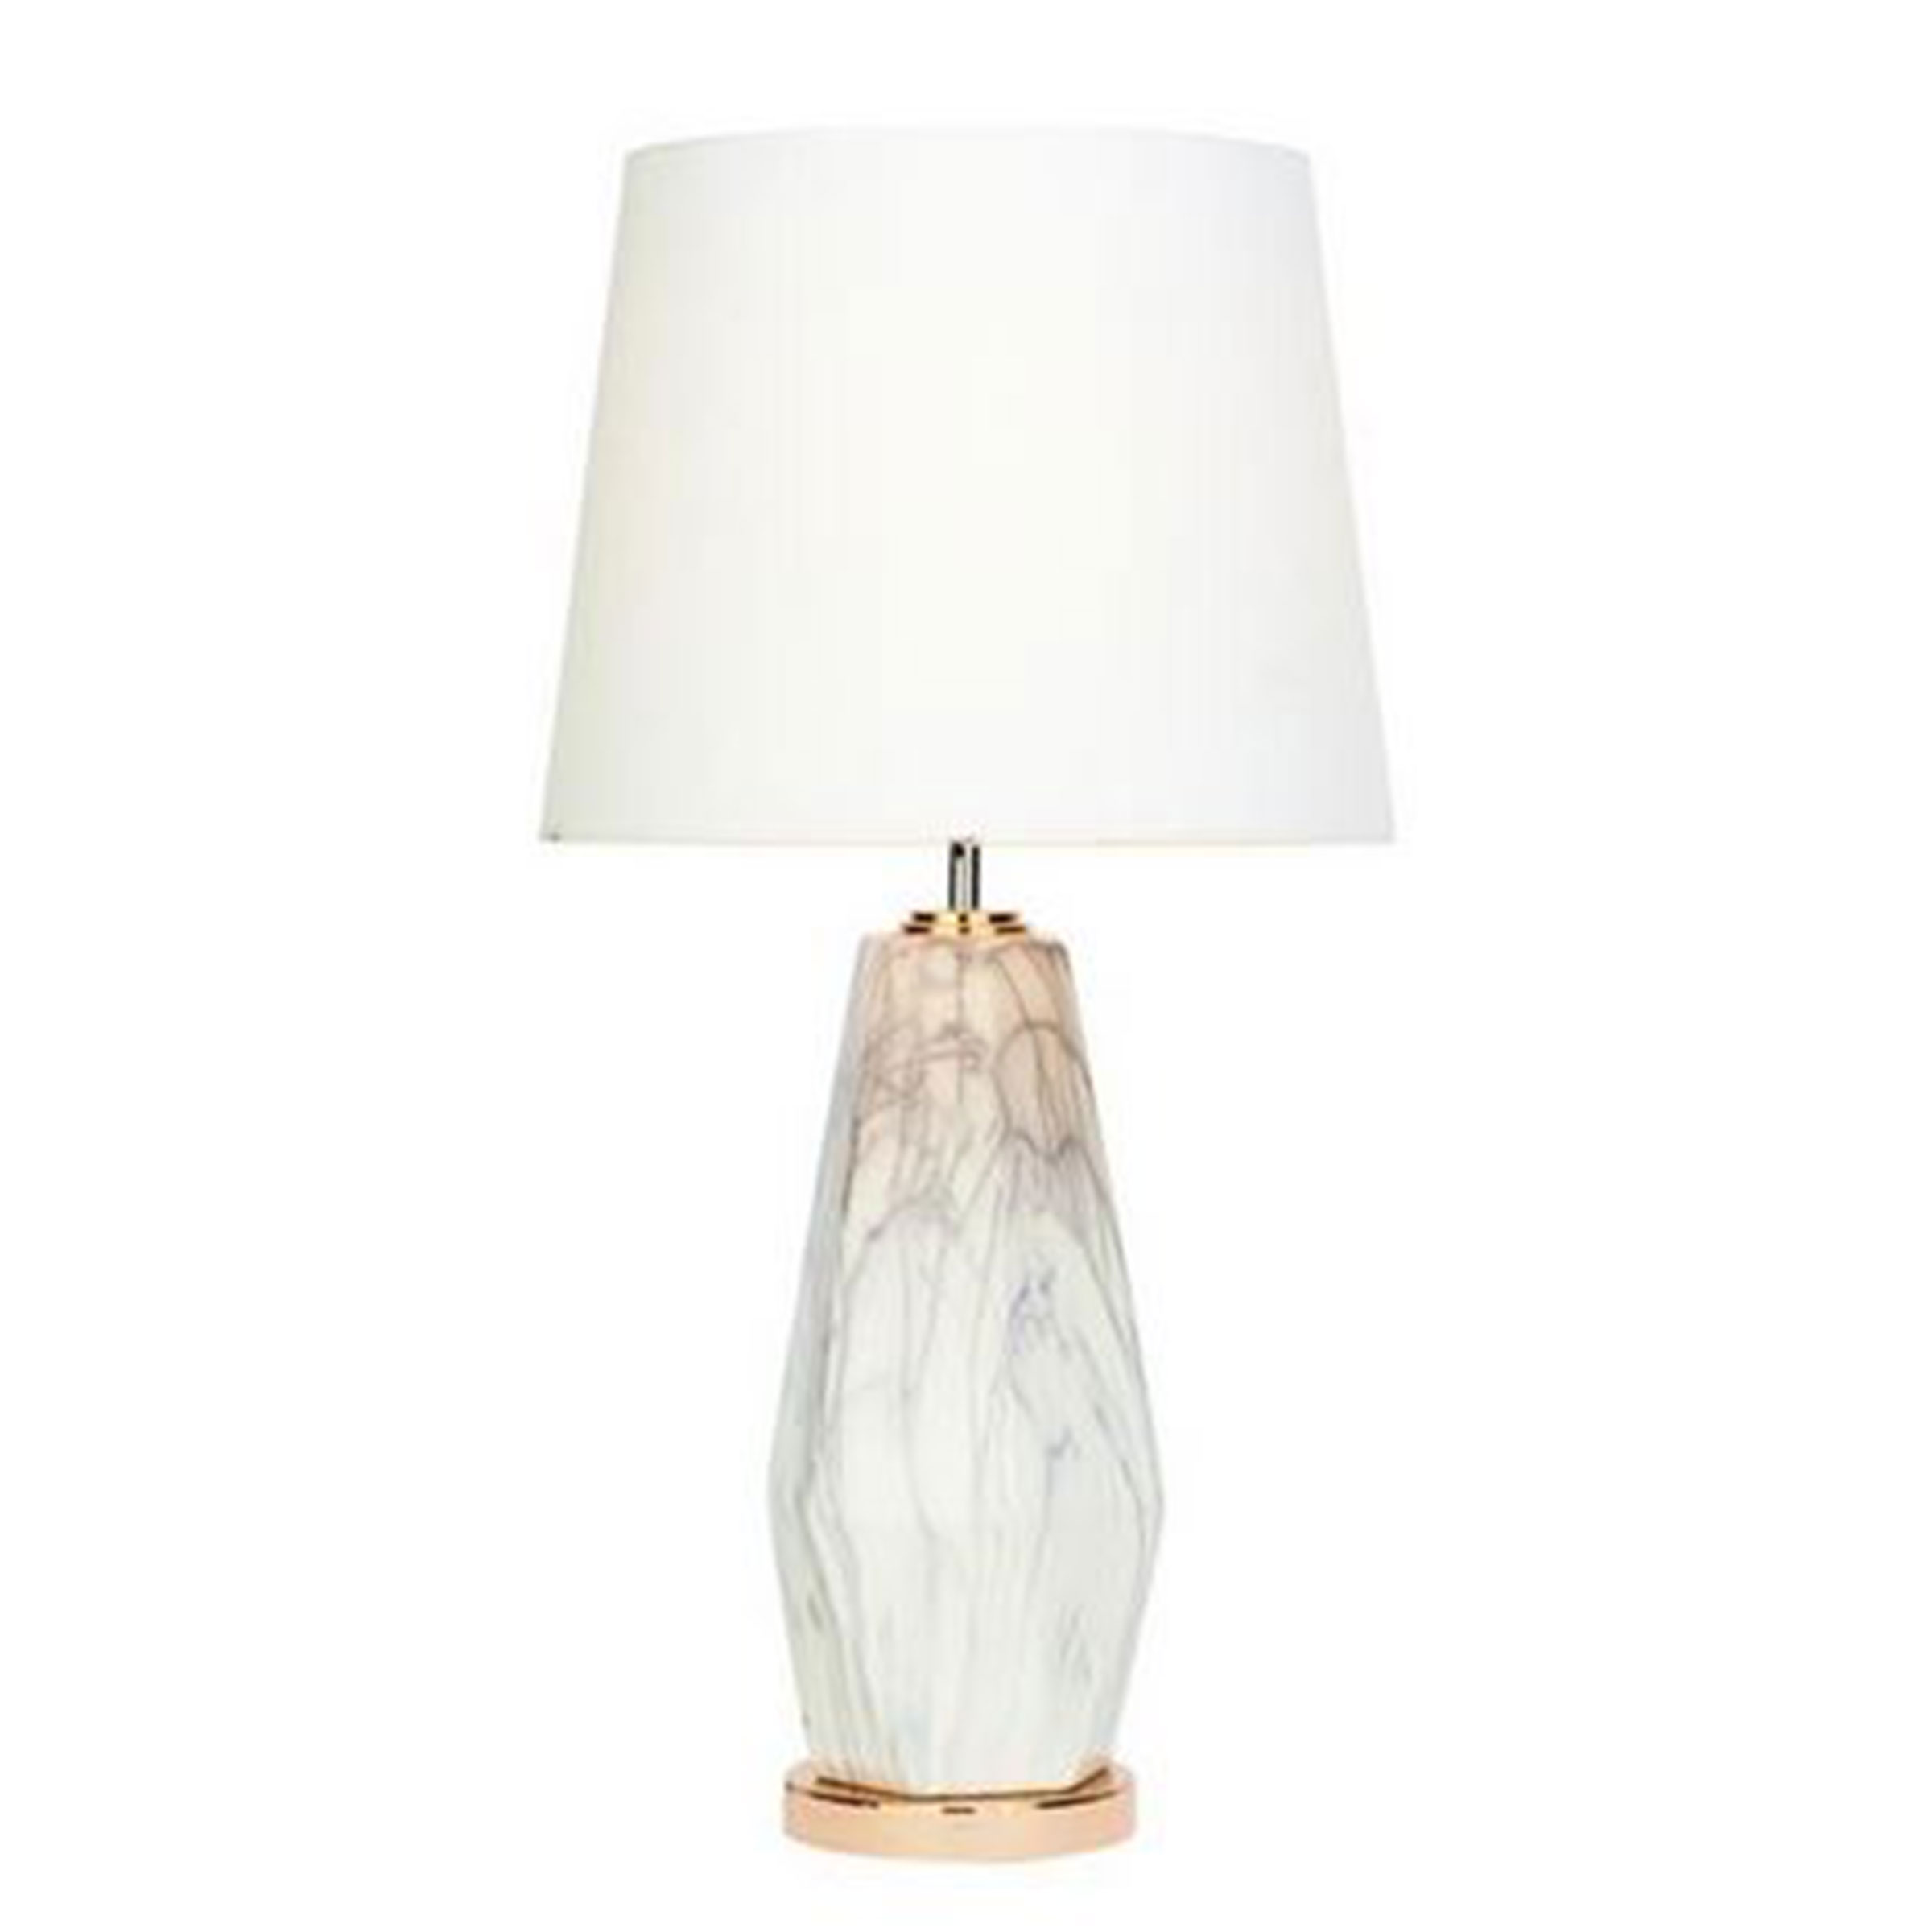 GOLD STONE GLAM TABLE LAMP